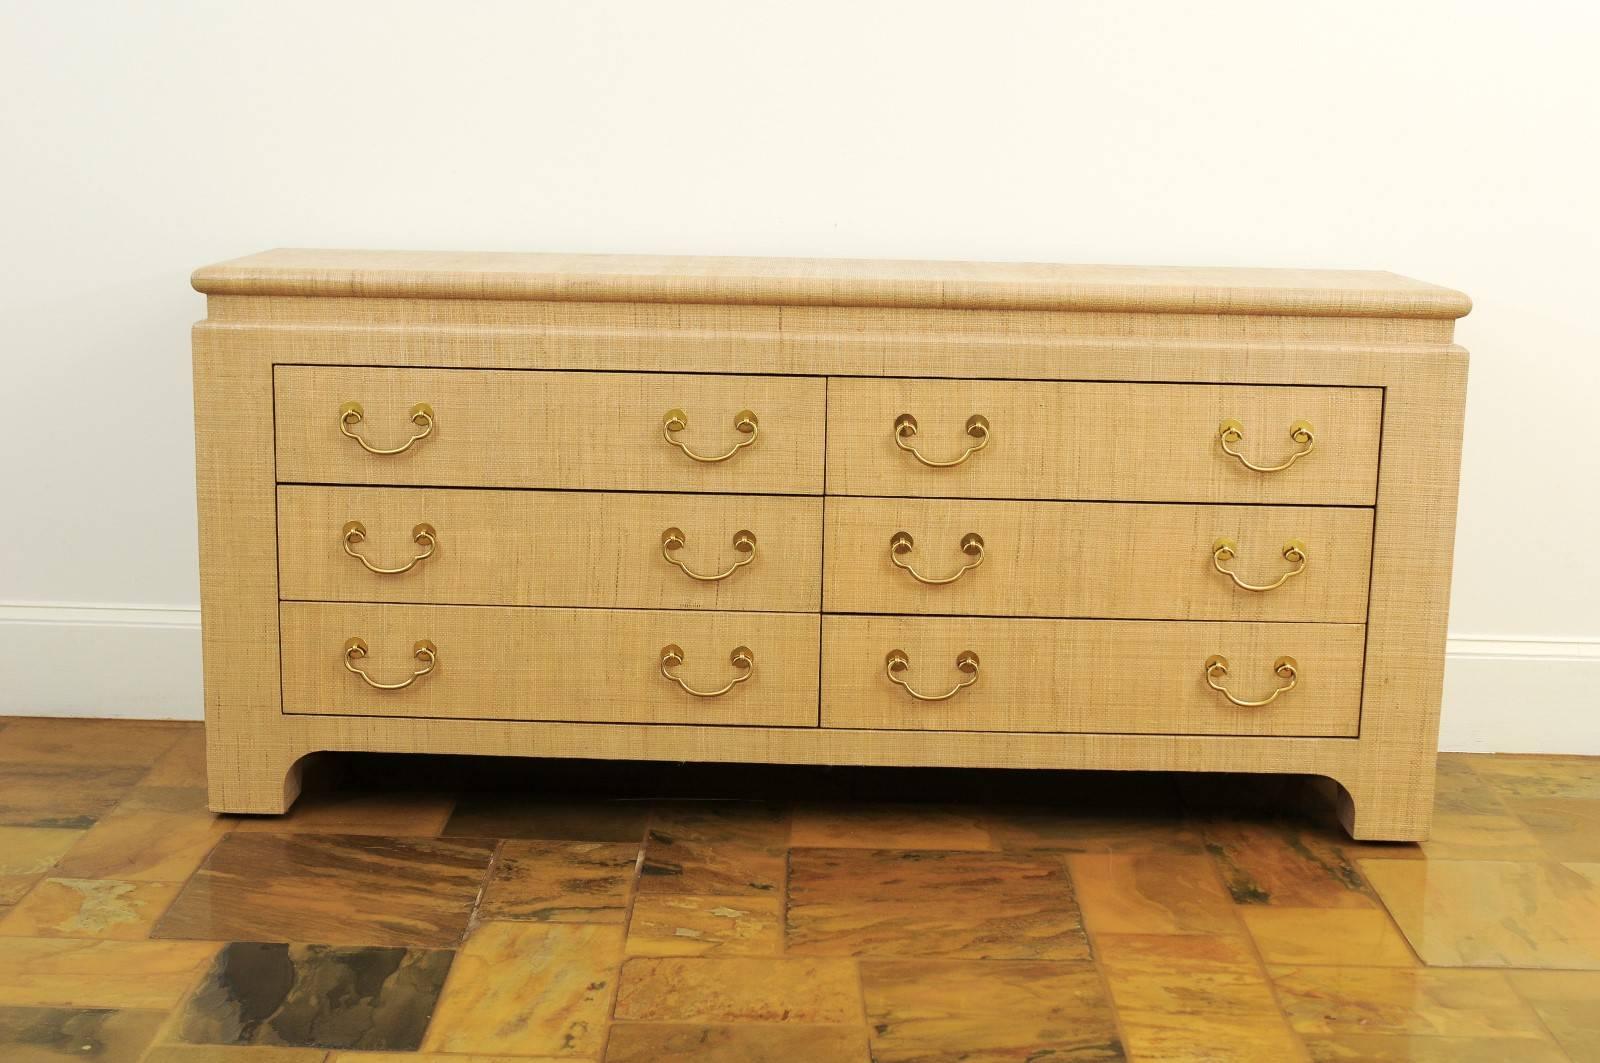 A stellar six-drawer chest from the boutique production of Harrison-Van horn, circa 1995. Exquisite case design with fabulous lines. Stylish Pagoda top detail and solid brass hardware add drama. The piece is completely veneered in natural raffia